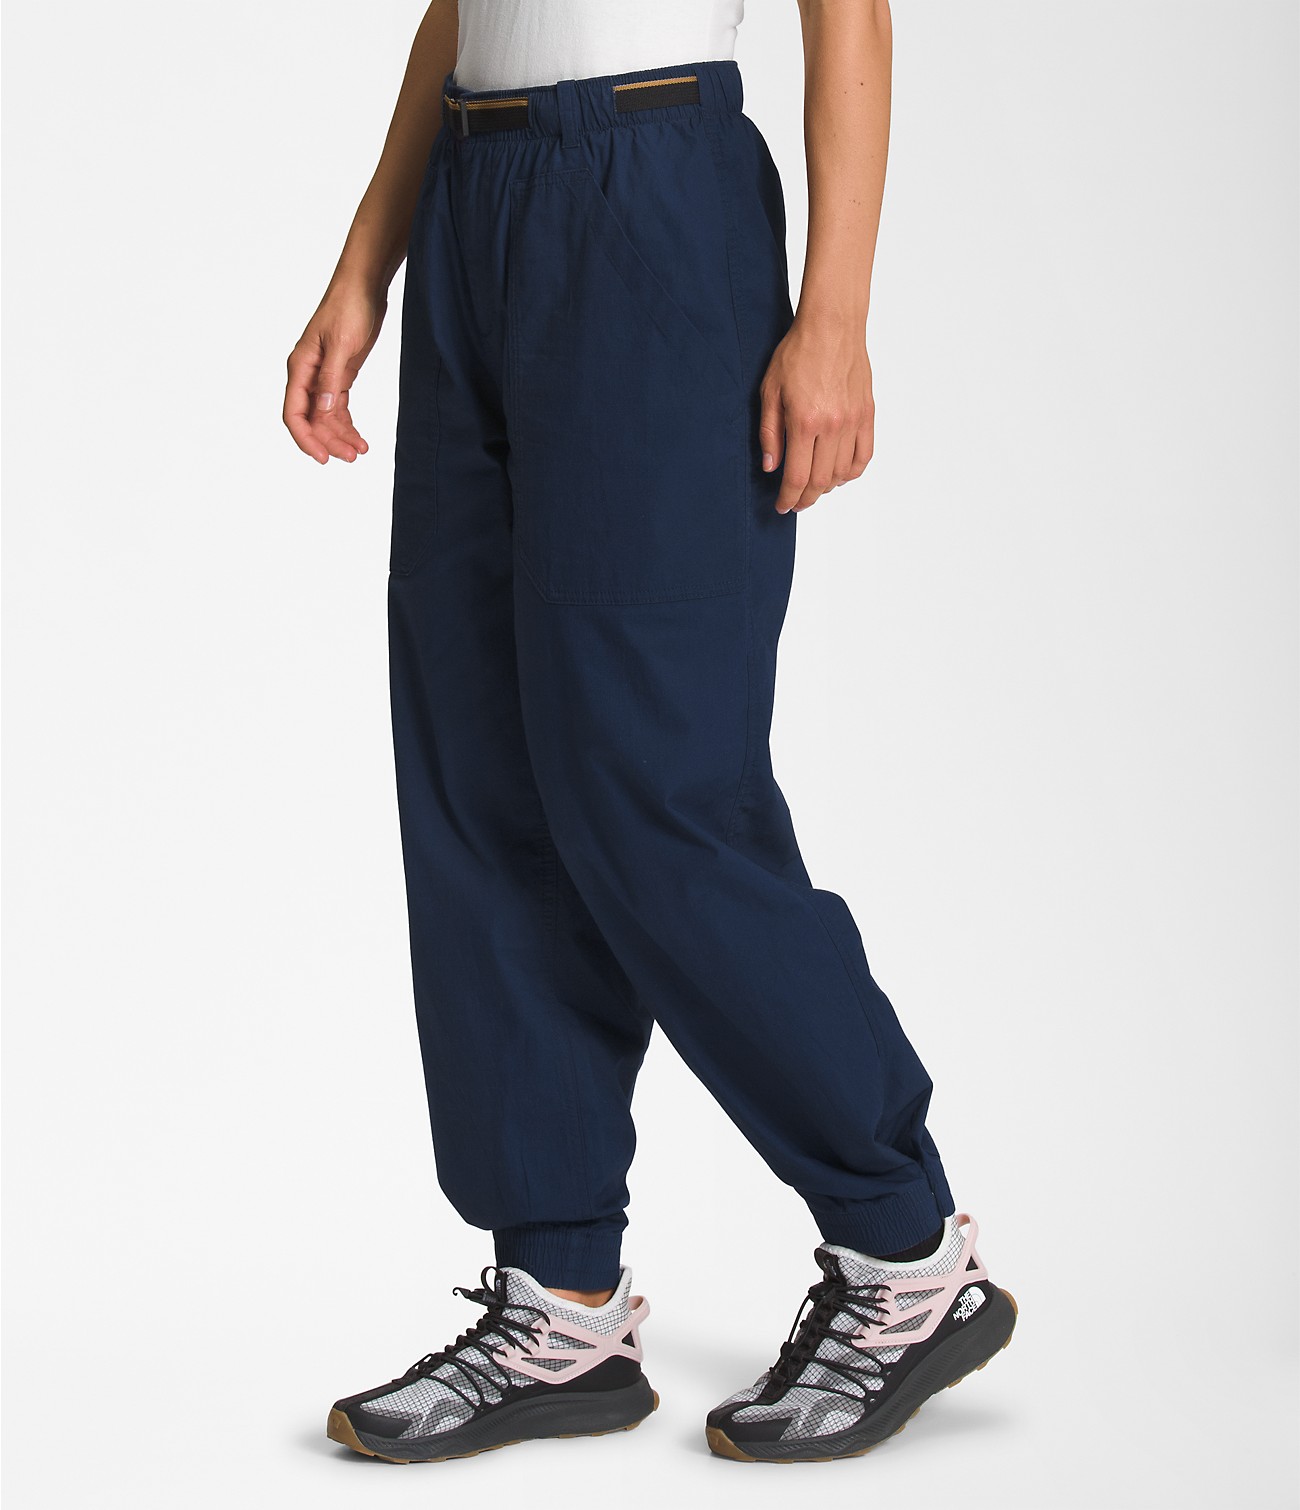 Women’s Ripstop Easy Pants | The North Face